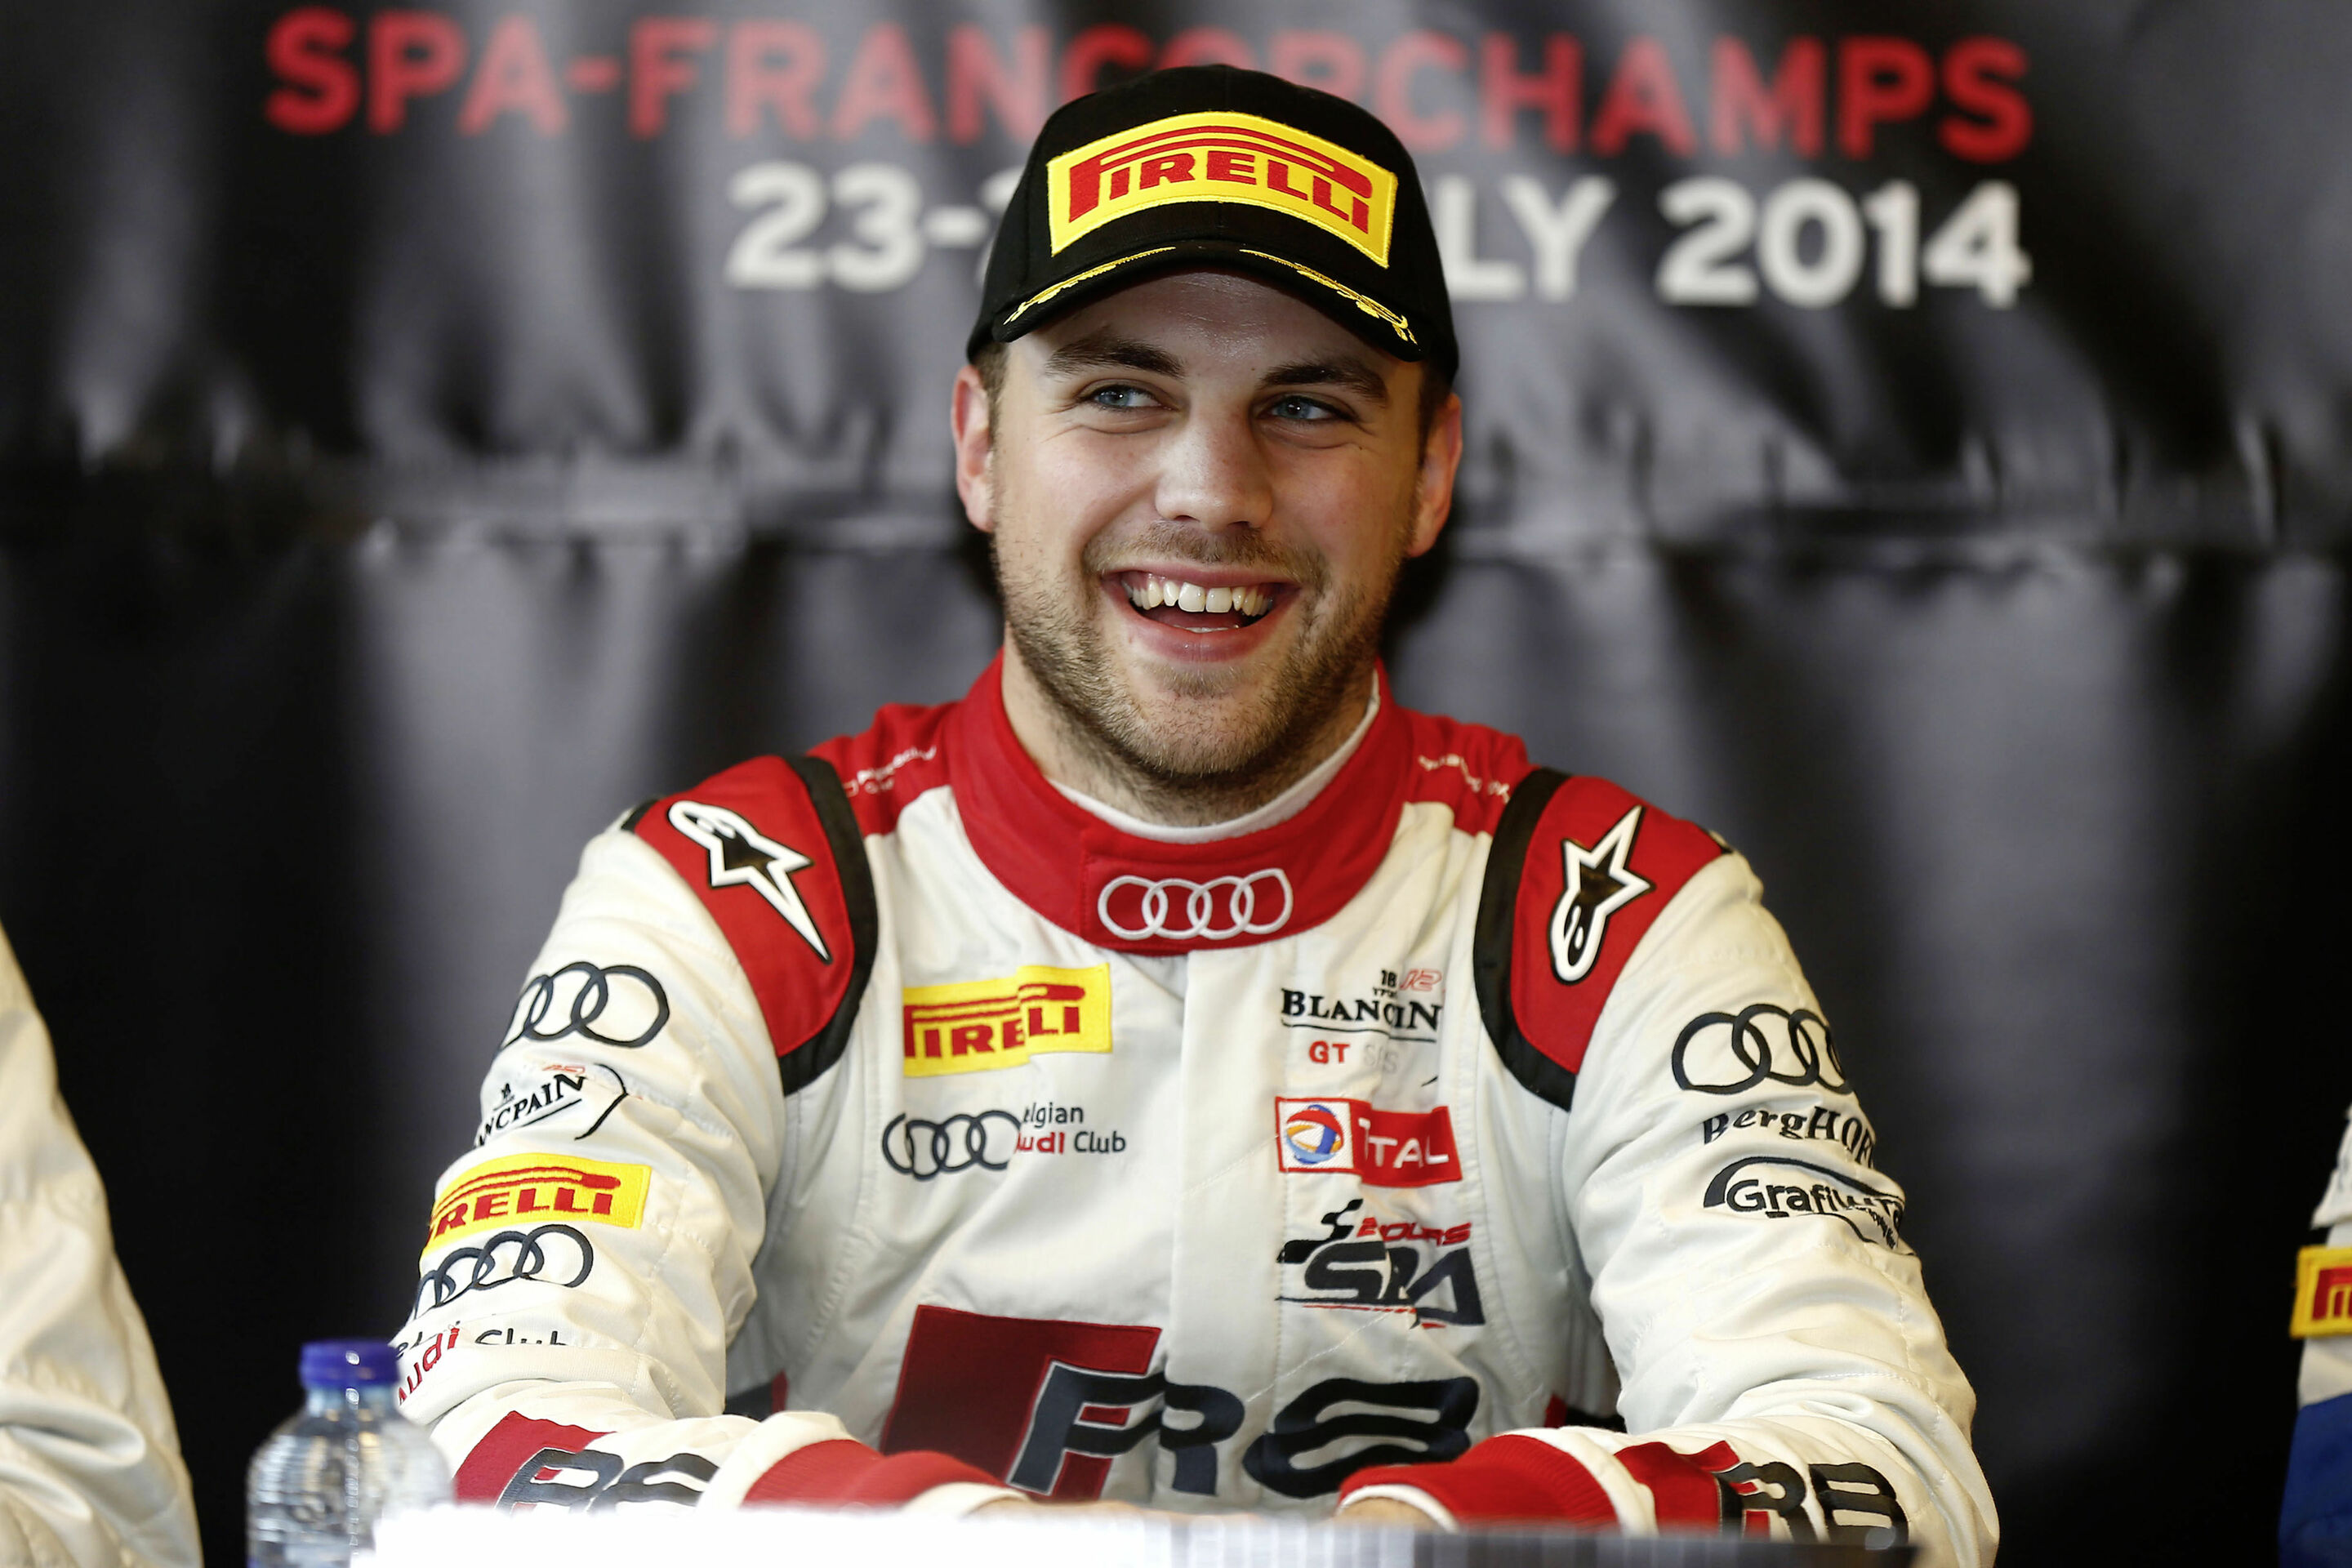 Pole position for Audi driver Laurens Vanthoor in home round at Spa